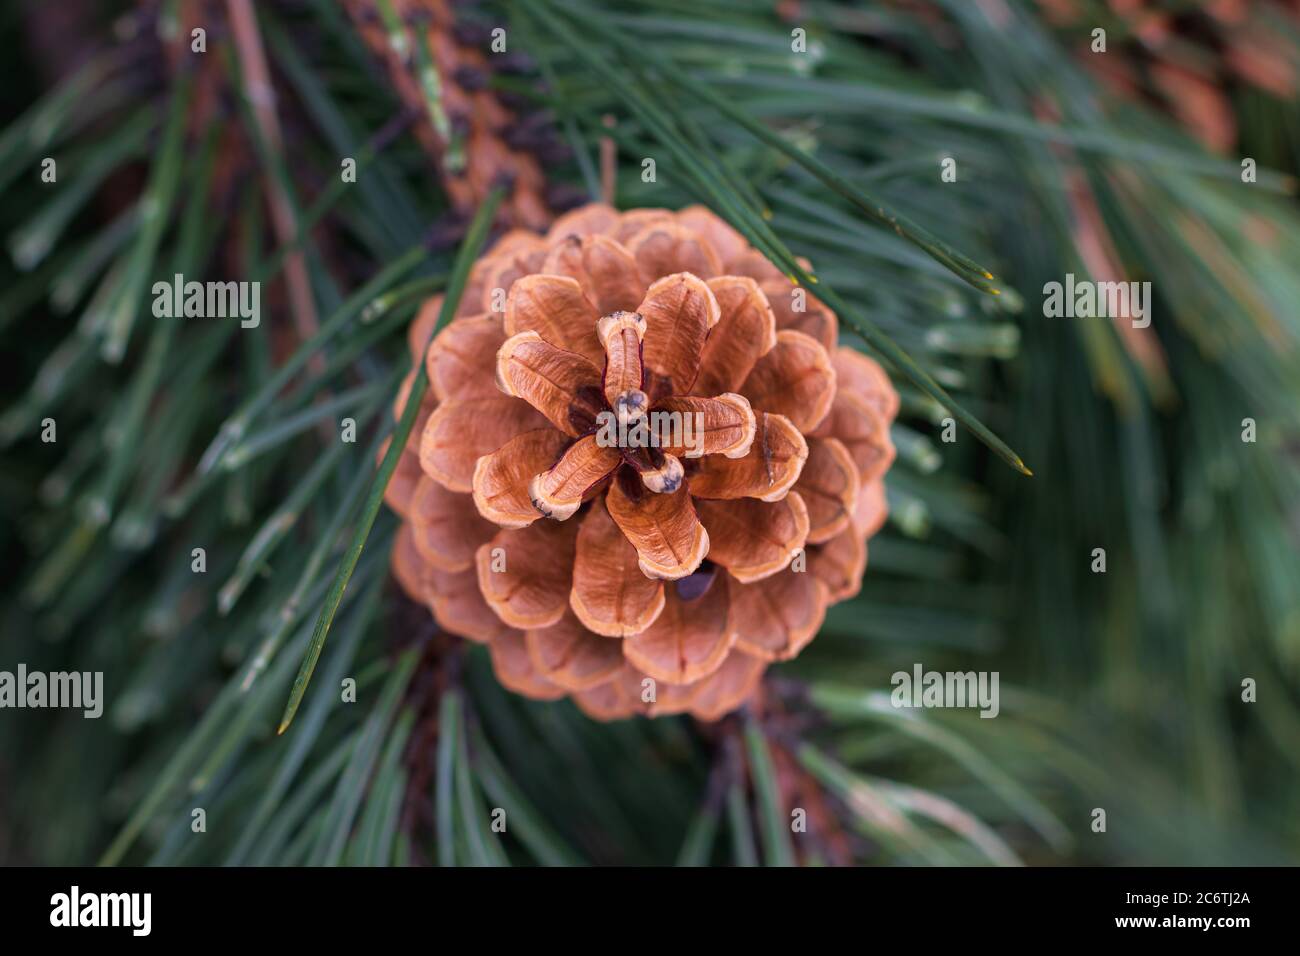 Brown conifer pine cone on branch Stock Photo